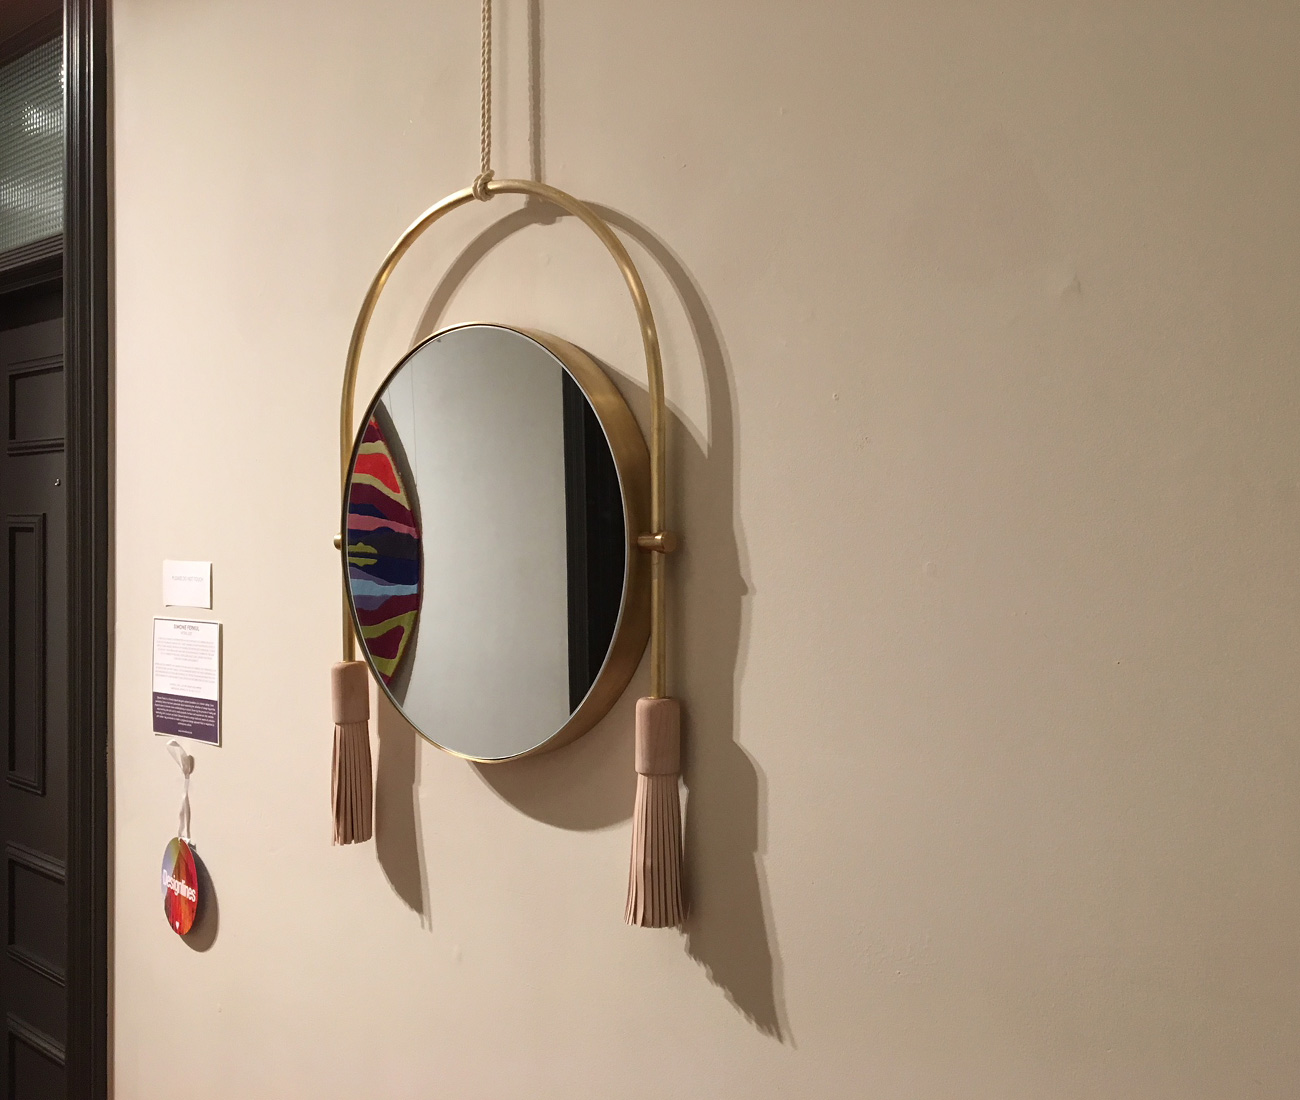 Interlude. We love everything Toronto designer Simone Ferkul produces and this stunning mirror did not disappoint. Just look at those metal curves and the soft leather tassels. So cool. (Gladstone Hotel, 1214 Queen St. W.)